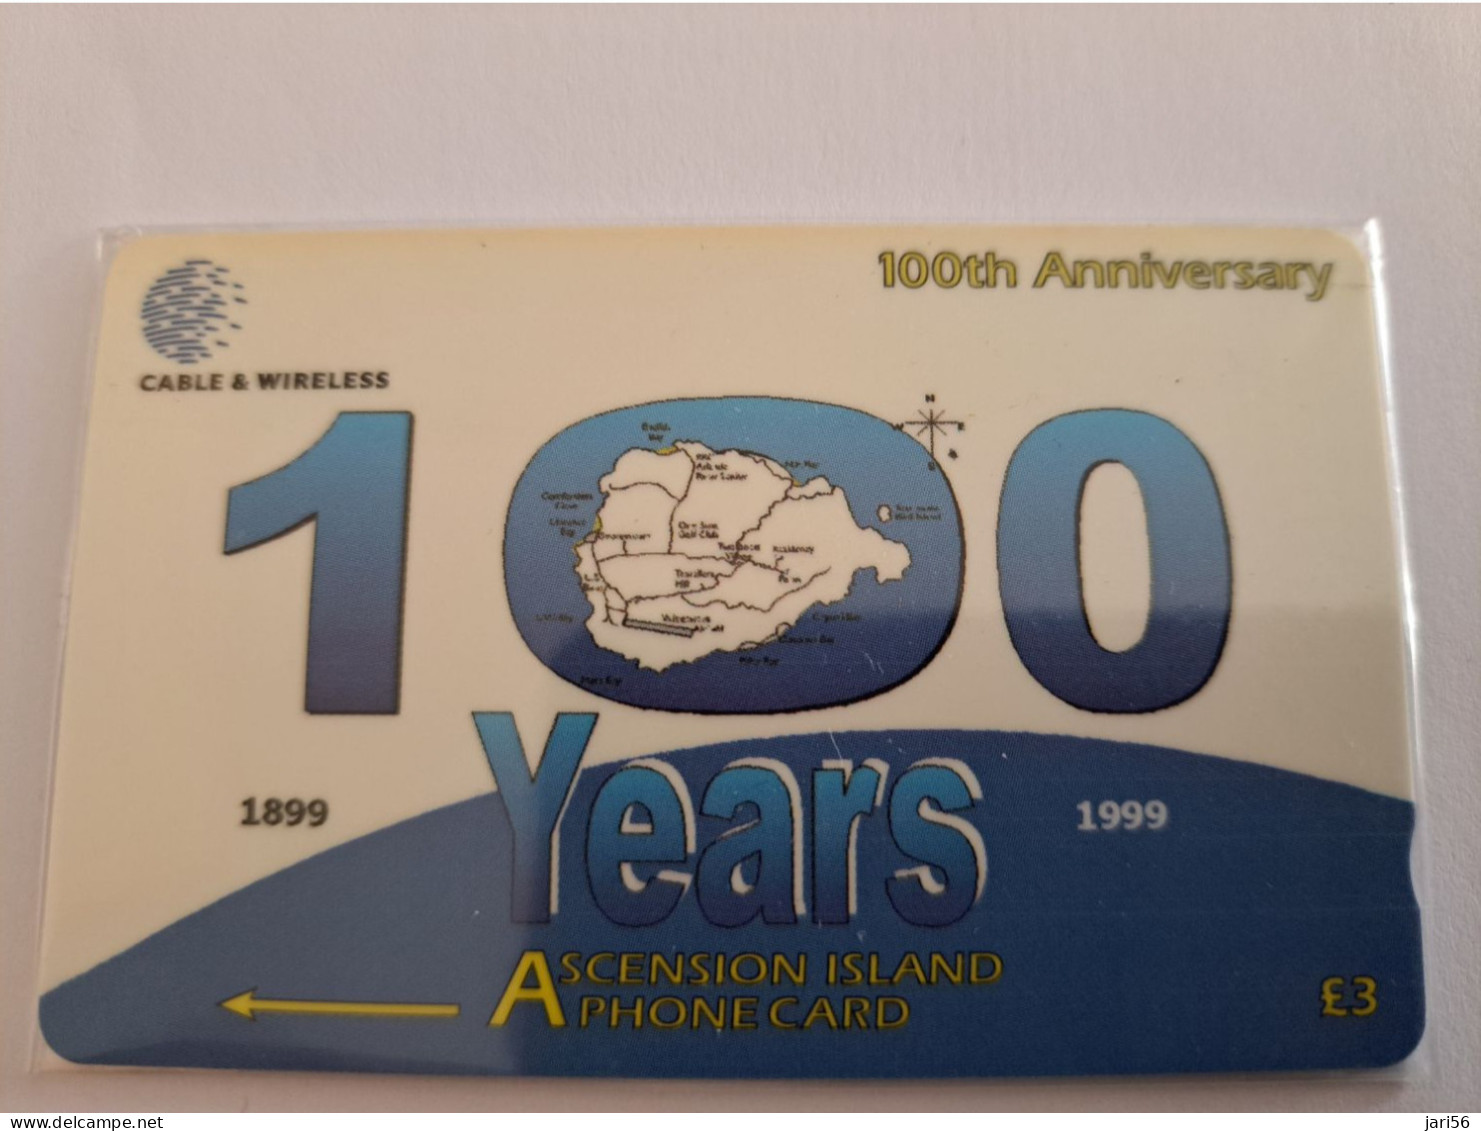 ASCENSION ISLAND   3 Pound  / 100 YEARS ANNIVERSARY /ASC-M-308A/  308CASA  MINT IN WRAPPER    NEW  Logo C&W **13663** - Ascension (Insel)